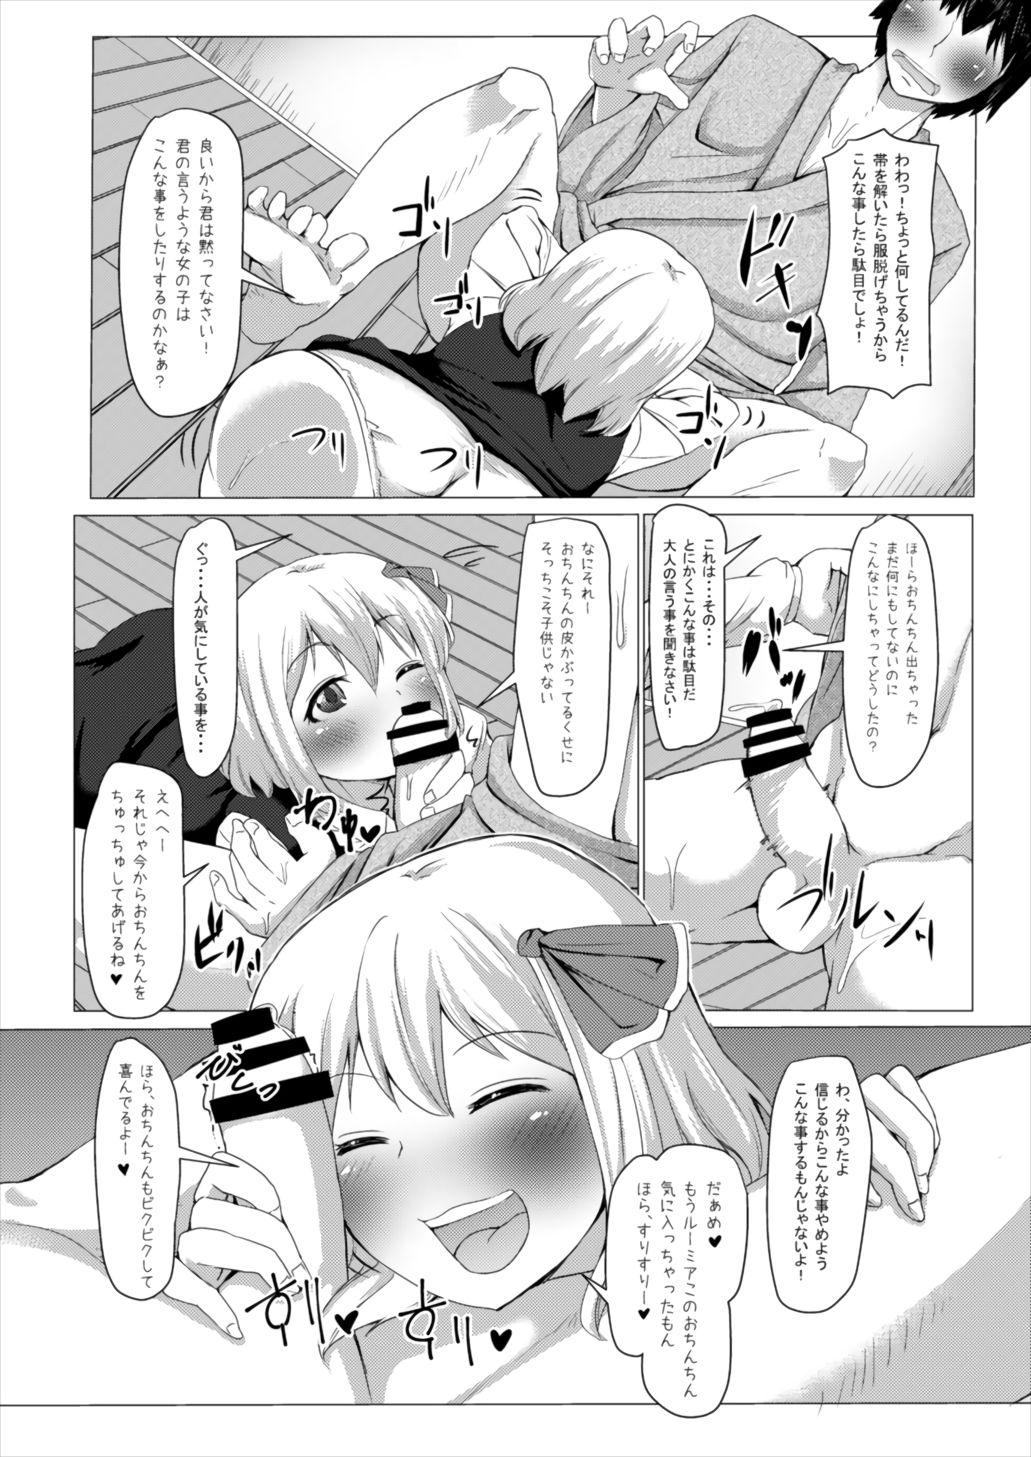 Parties Yasashii Rumia - Touhou project Porn Star - Page 7